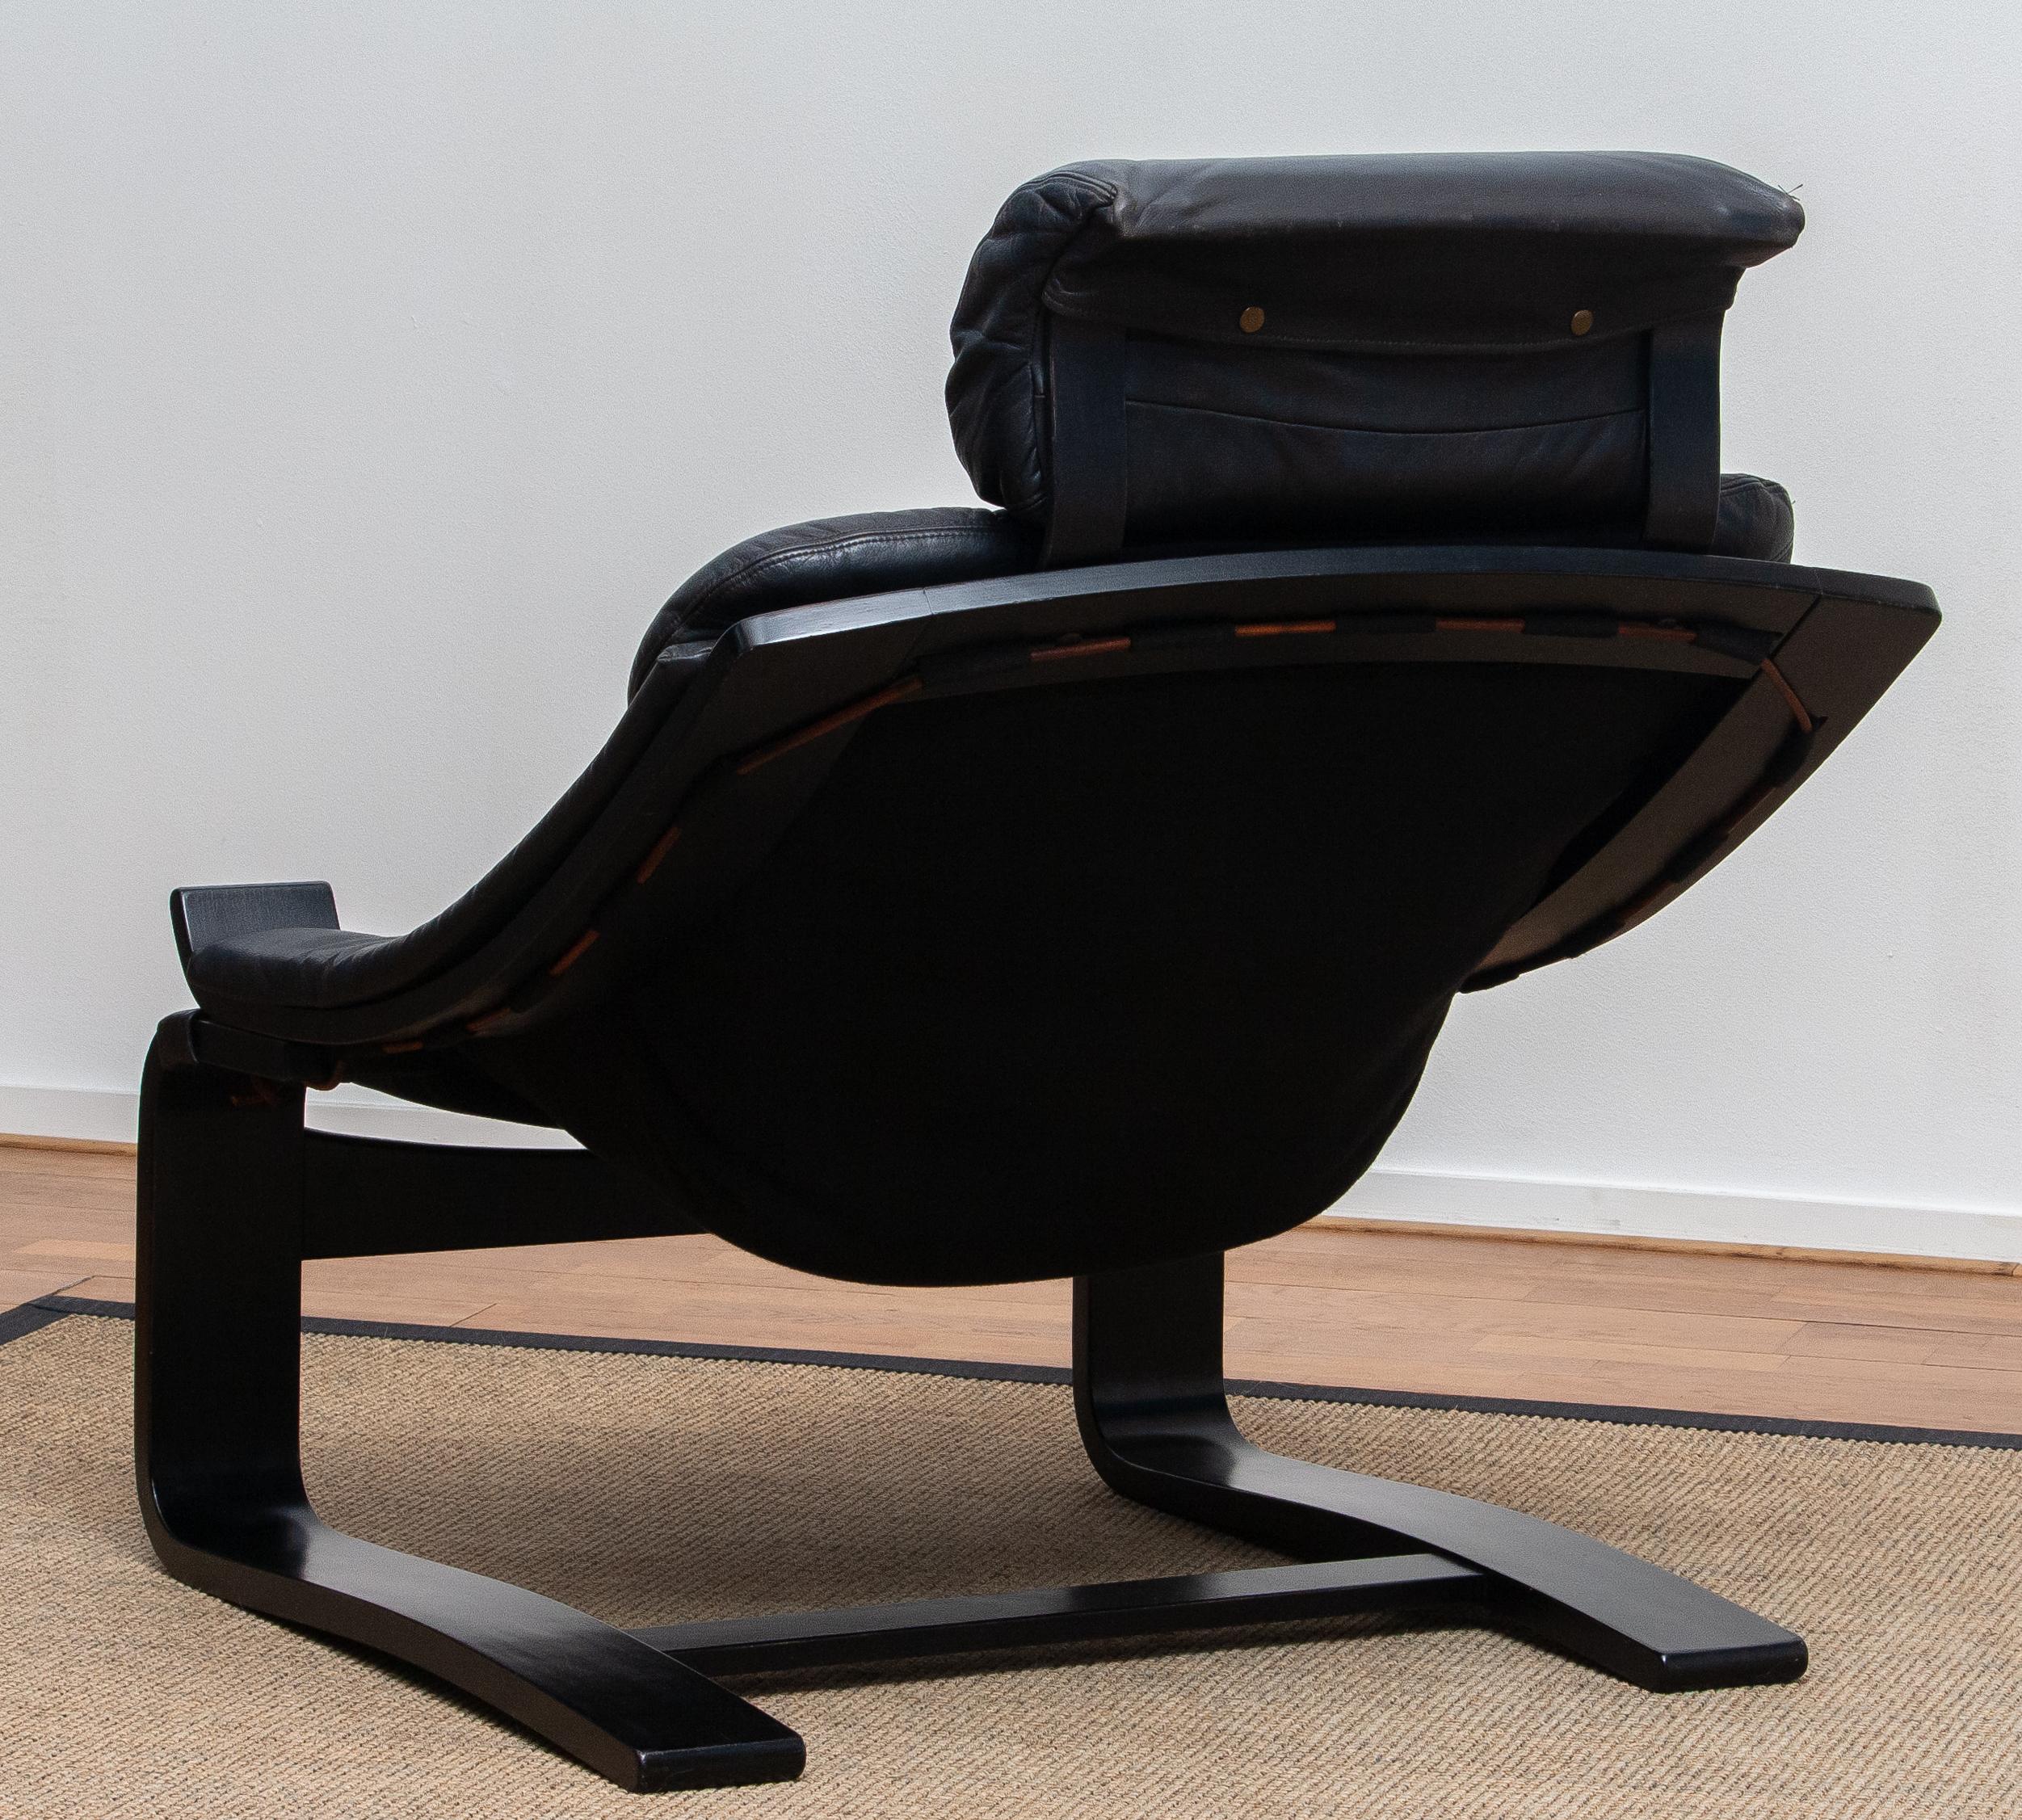 1970s, Black 'Kroken' Lounge Chair by Ake Fribytter for Nelo Sweden in Leather 6